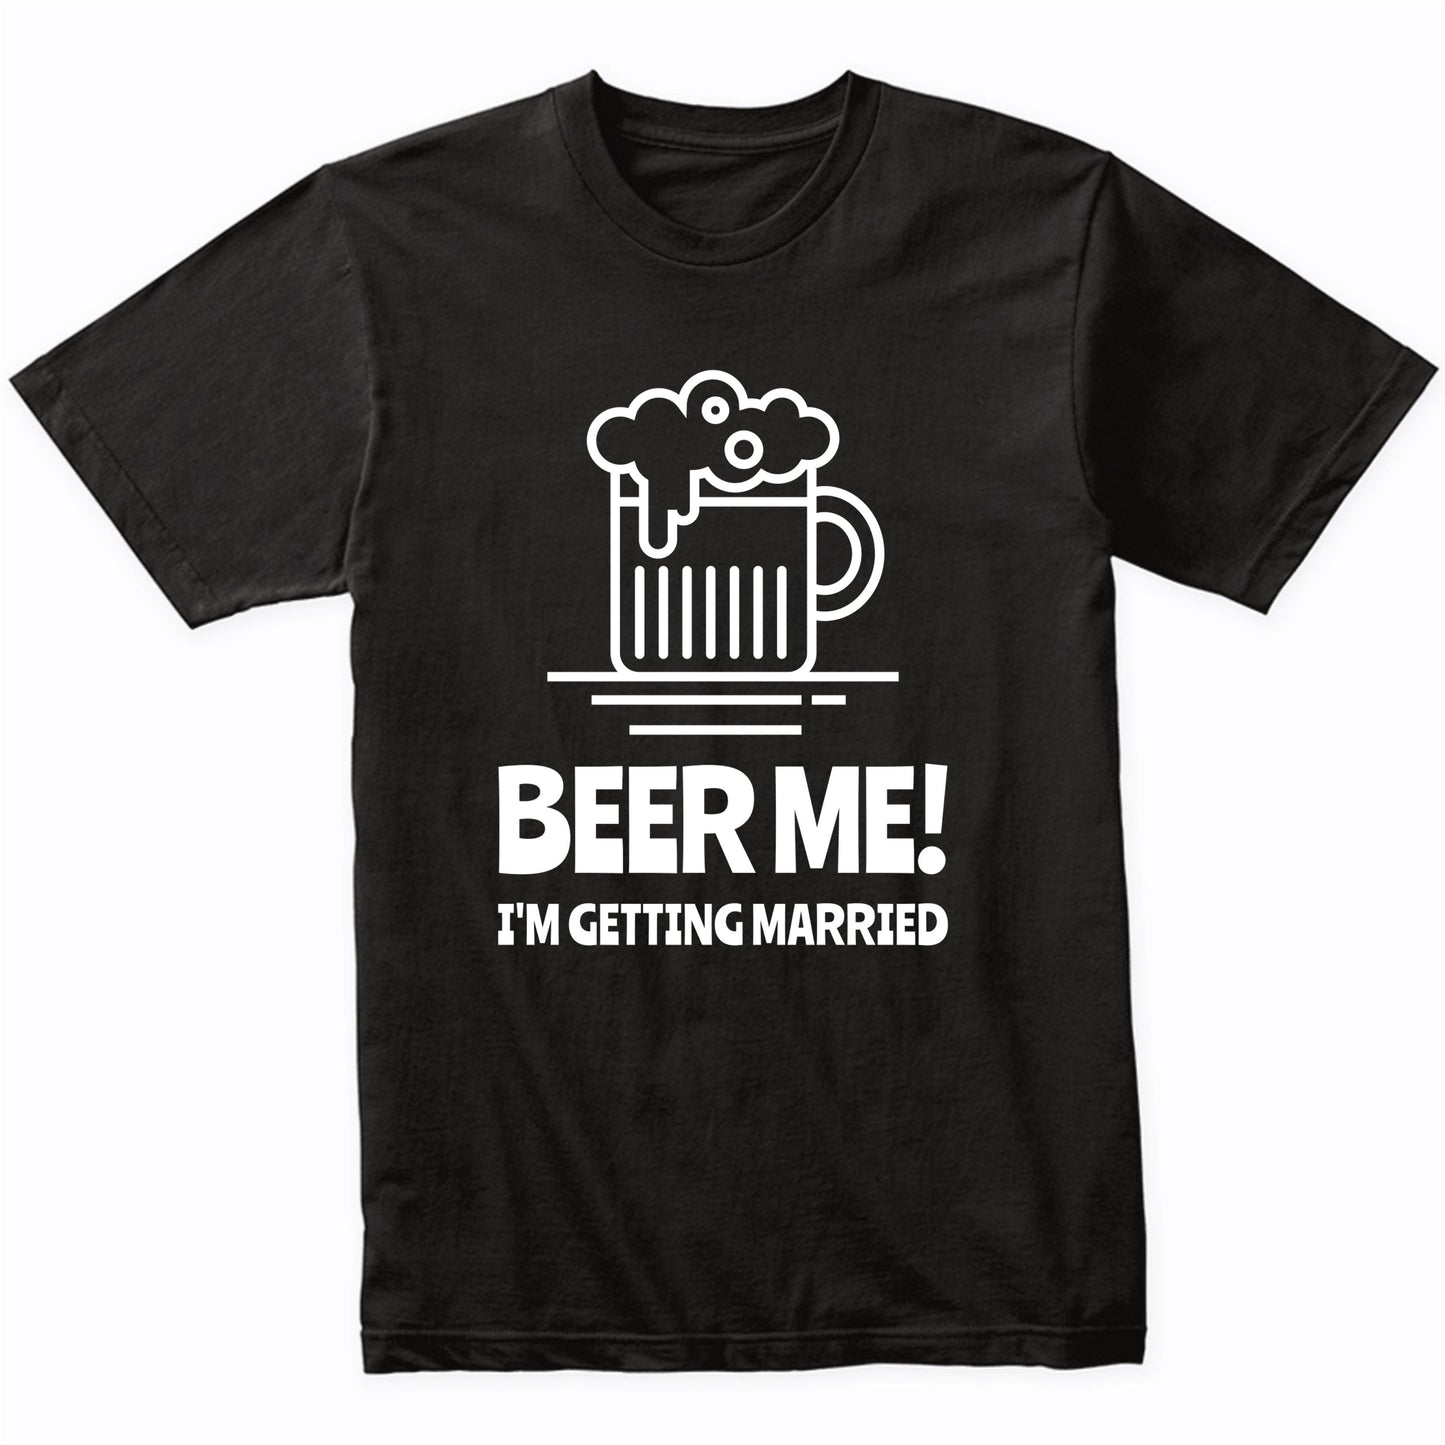 Beer Me I'm Getting Married Funny Bachelor Party Drinking Shirt